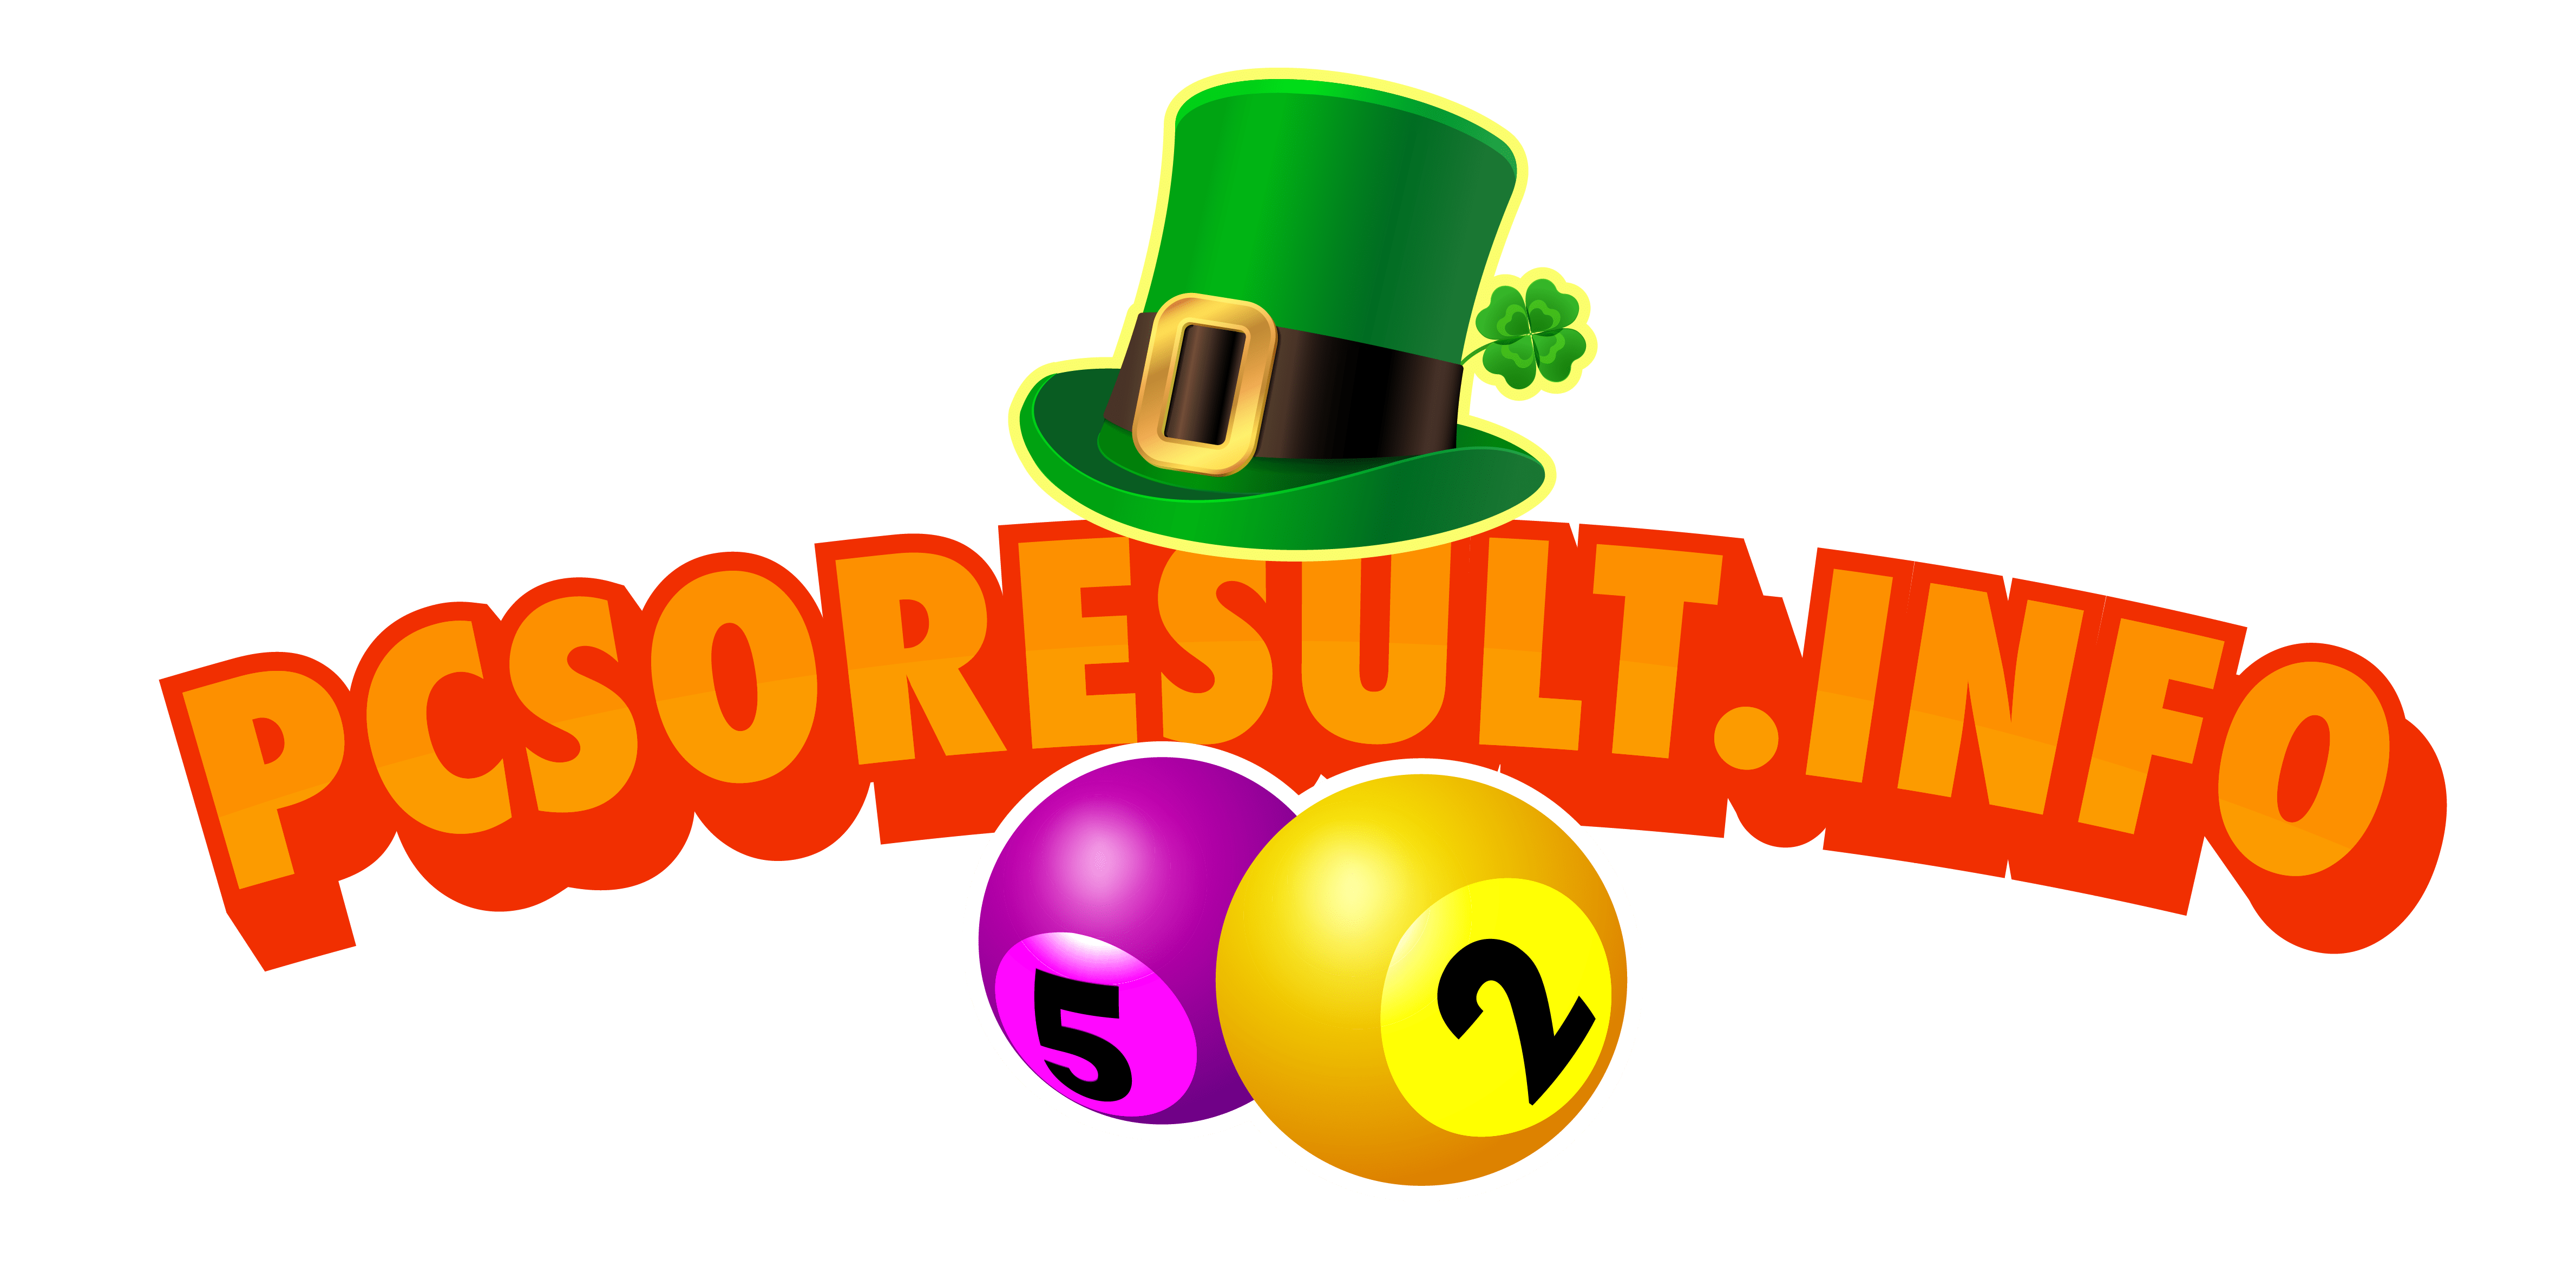 PCSO Results Today: Get the Latest PCSO Lotto Results 2023